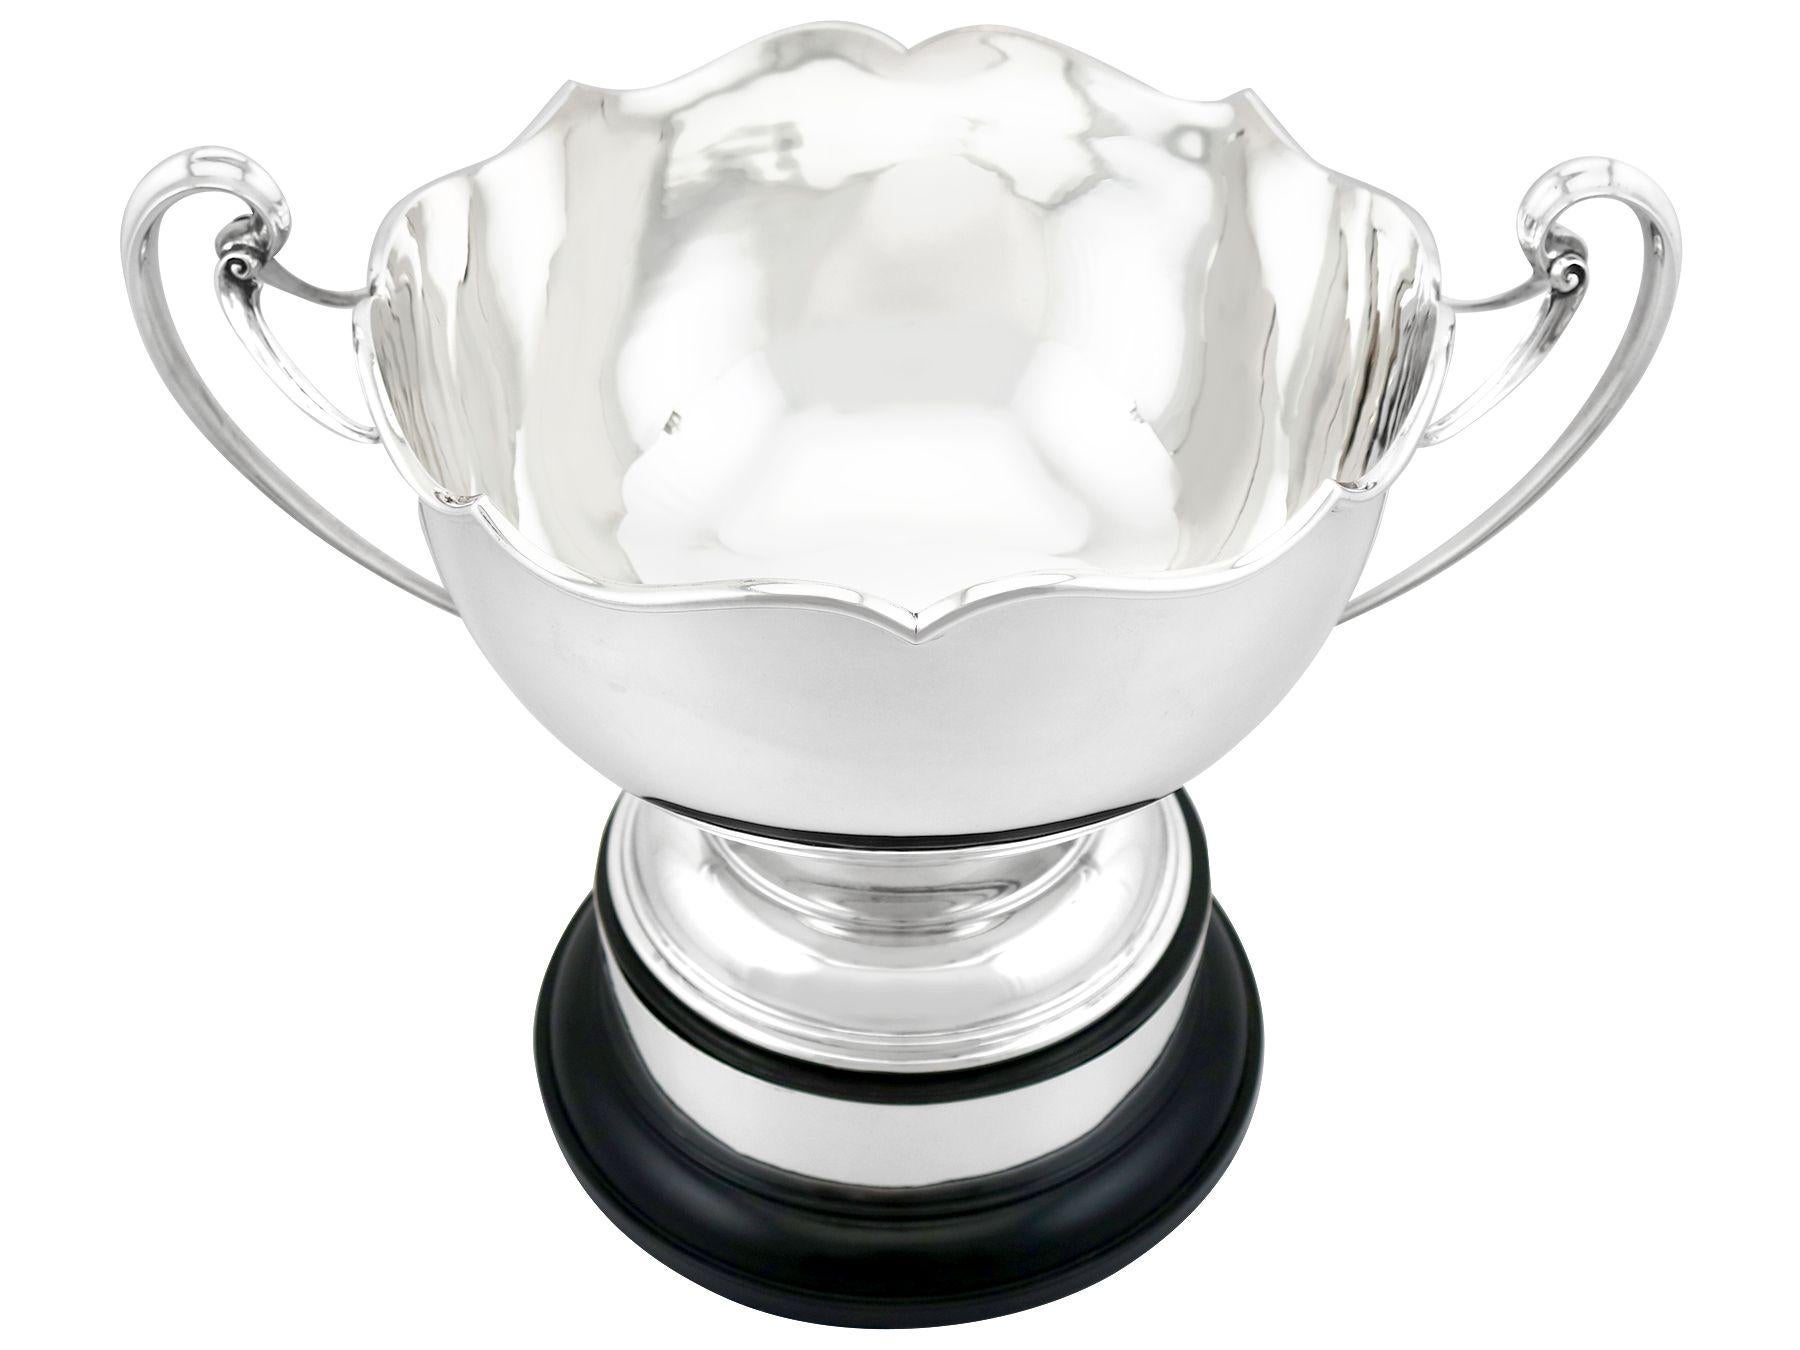 An exceptional, fine and impressive antique English sterling silver presentation bowl and plinth; an addition to our ornamental silverware collection.

This exceptional, fine and impressive antique silver bowl has a circular rounded form onto a